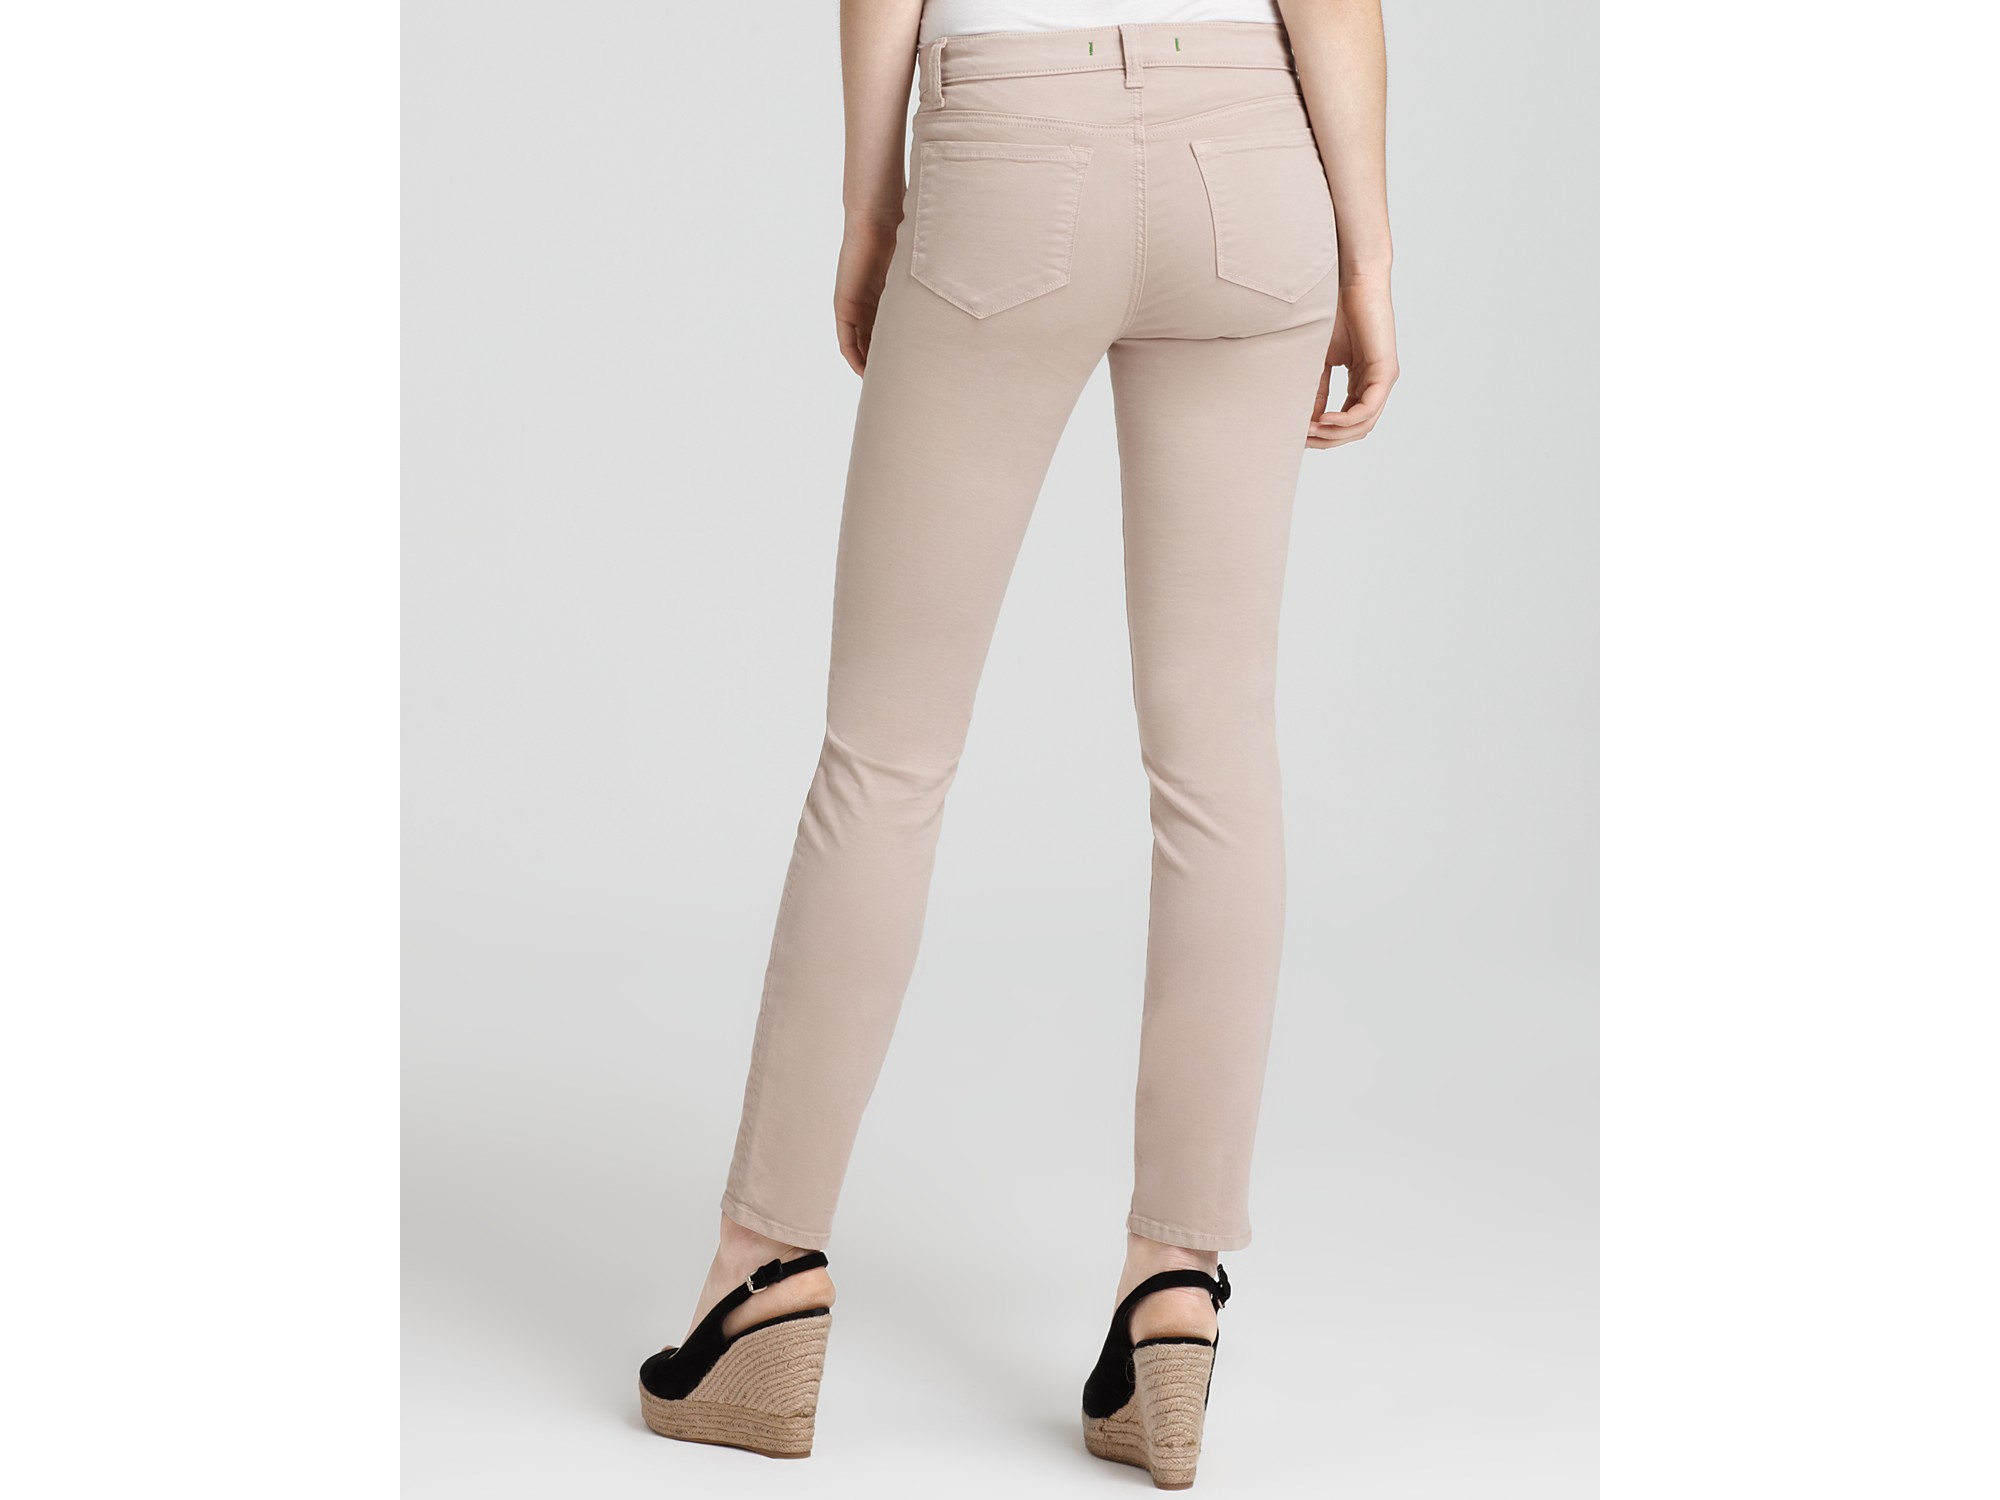 Lyst - J Brand 811 Mid Rise Luxe Twill Skinny Jeans in 